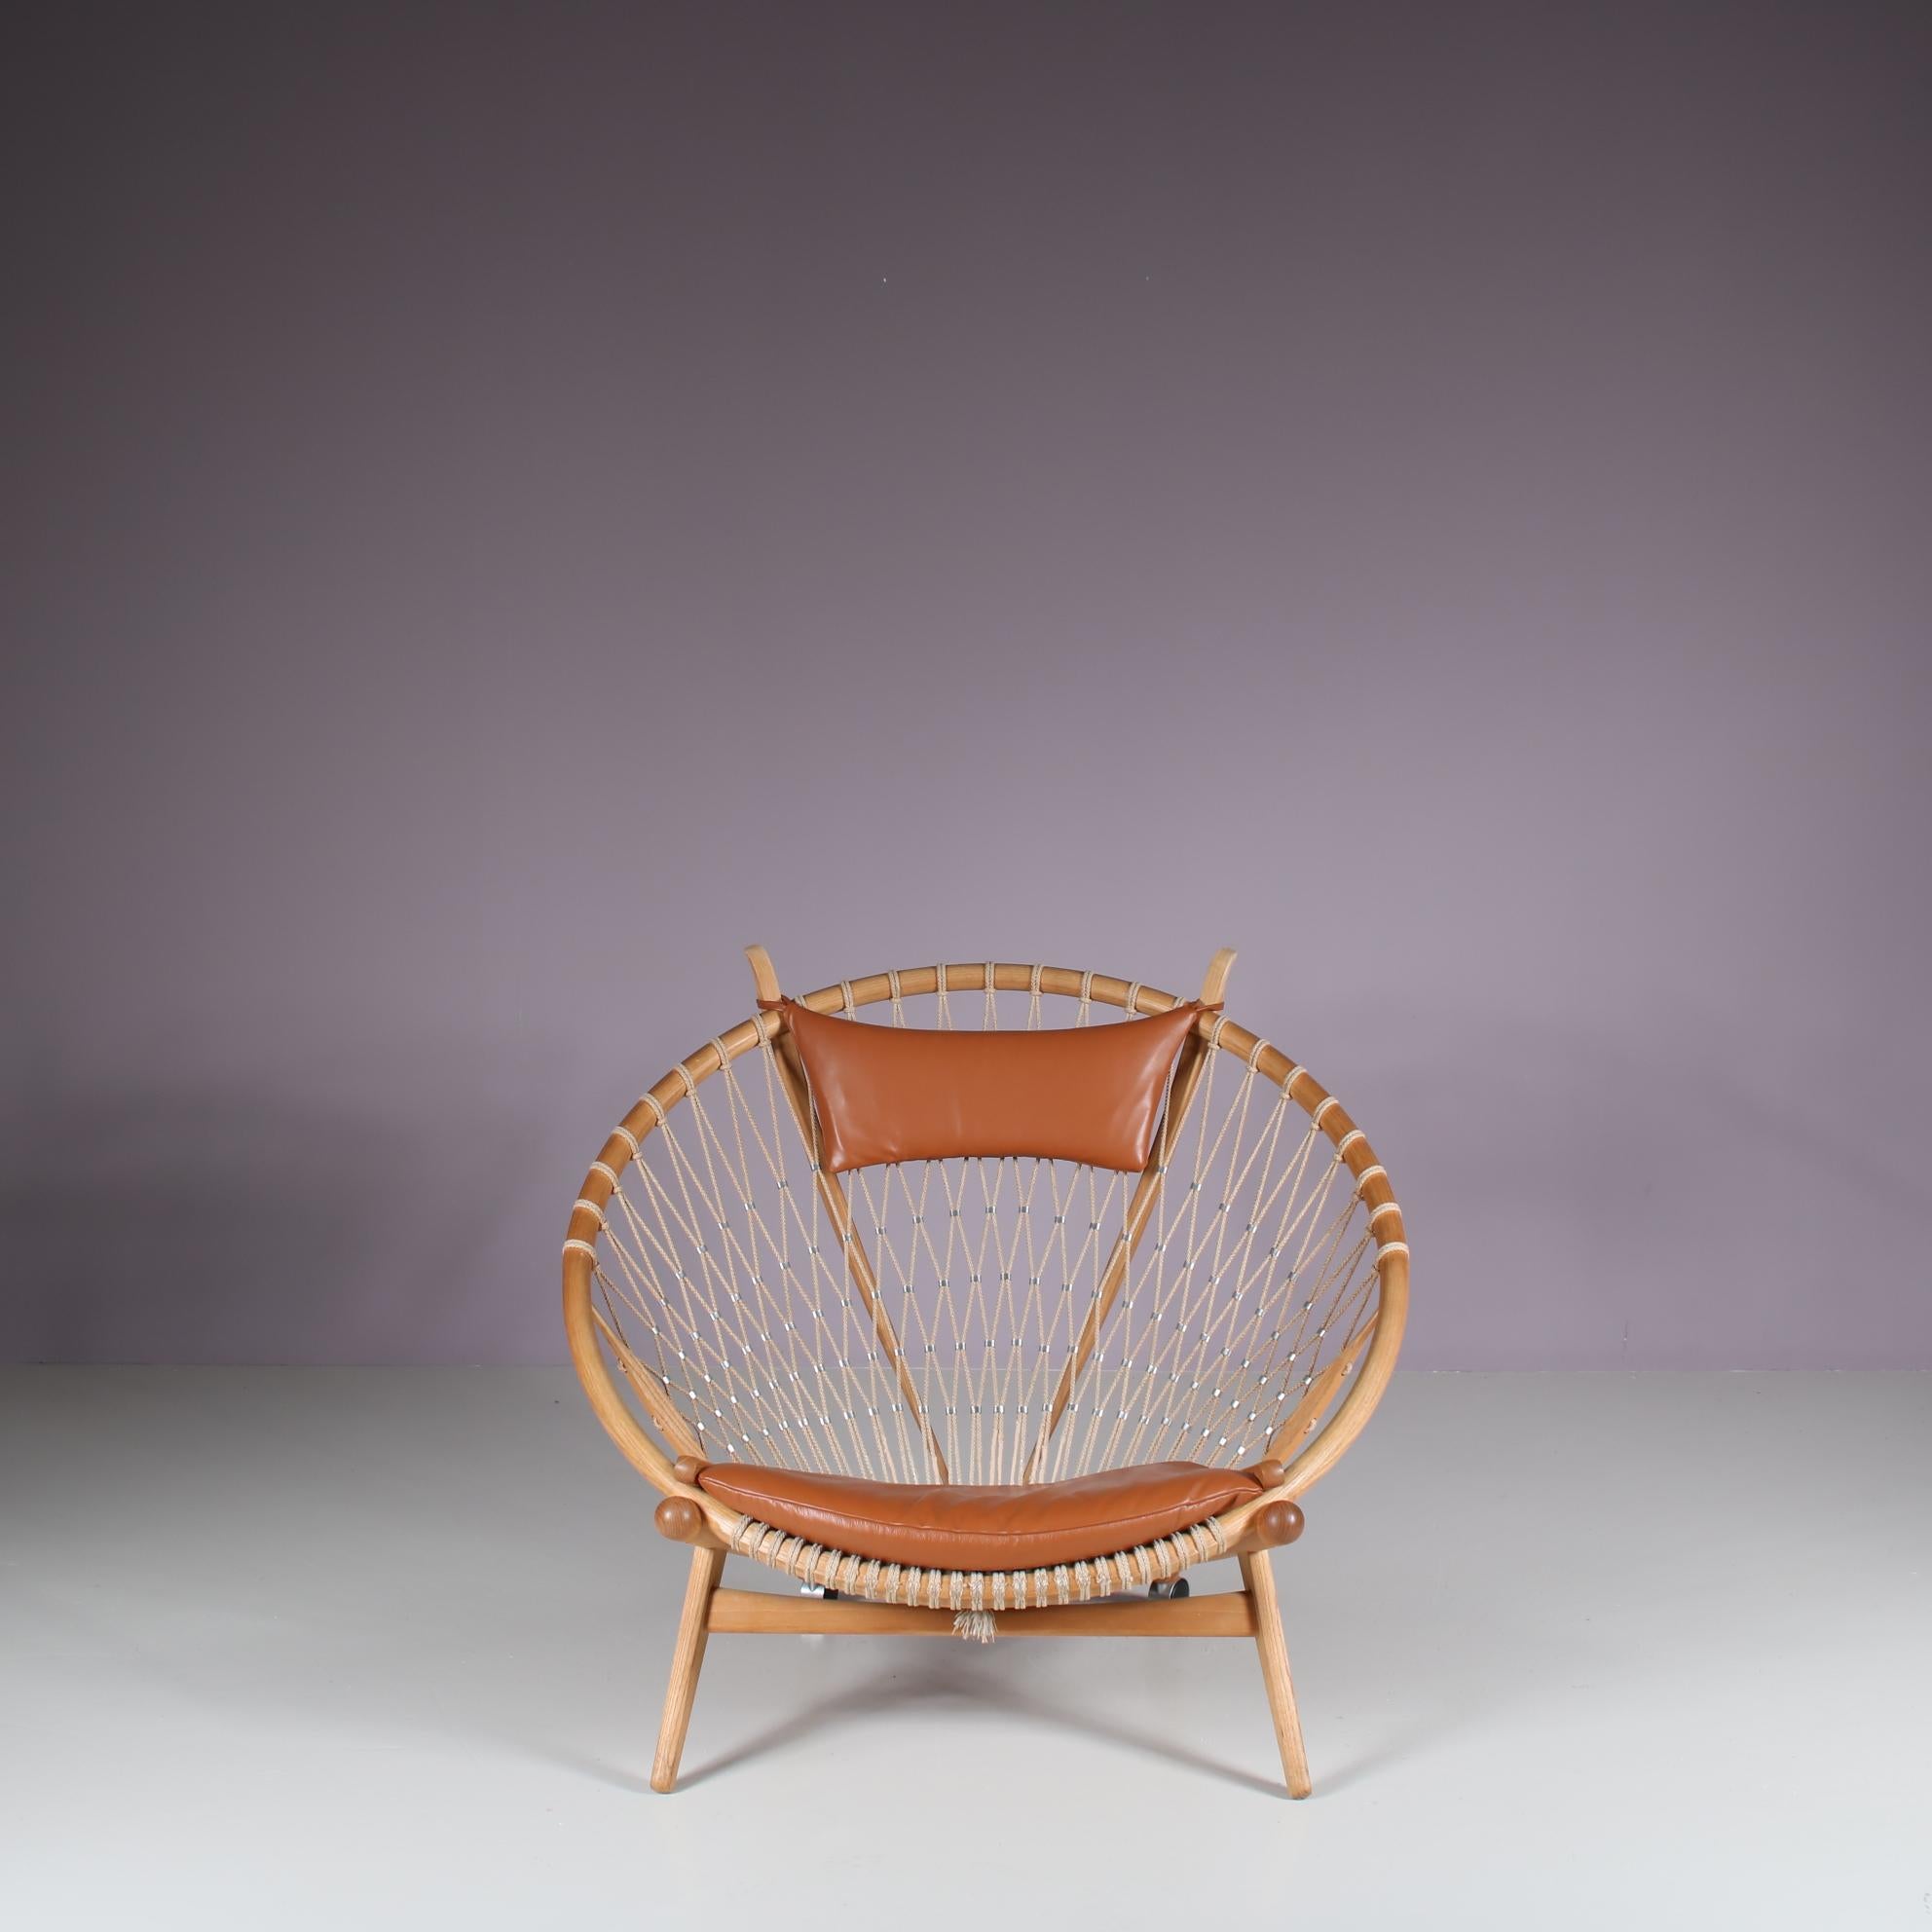 A truly iconic “Circle Chair”, model PP130, designed by Hans J. Wegner and manufactured by PP Mobler in Denmark around 1980.

This remarkable chair is made of the highest quality oak wood with a unique rope structure creating the support for seat